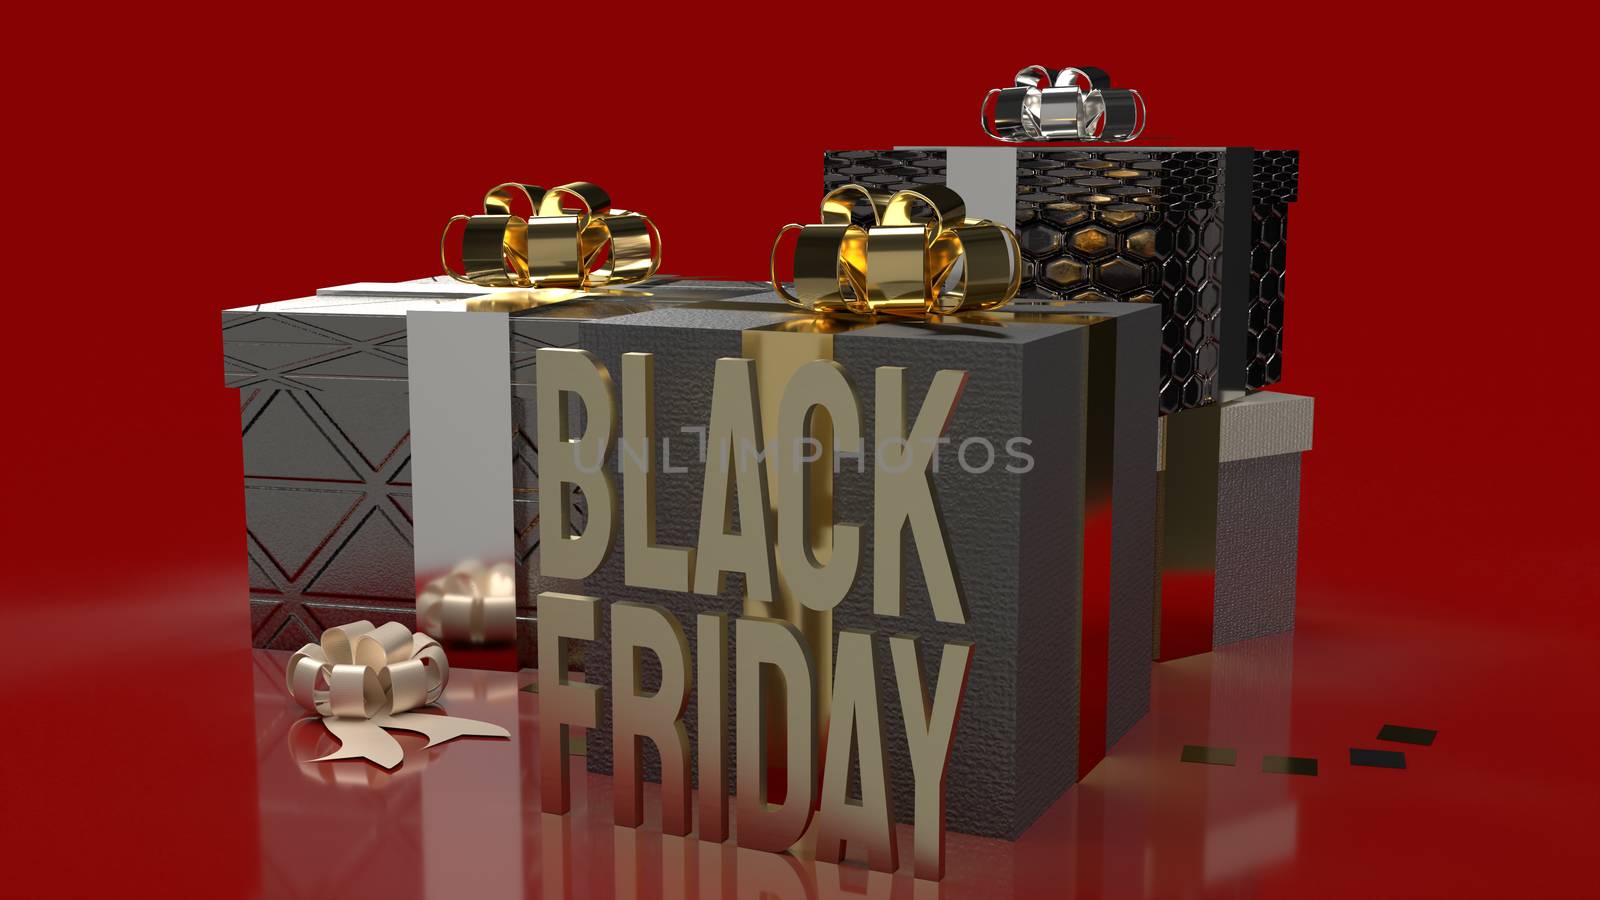 The Black Friday gold text and gift boxes on red background for  by Niphon_13